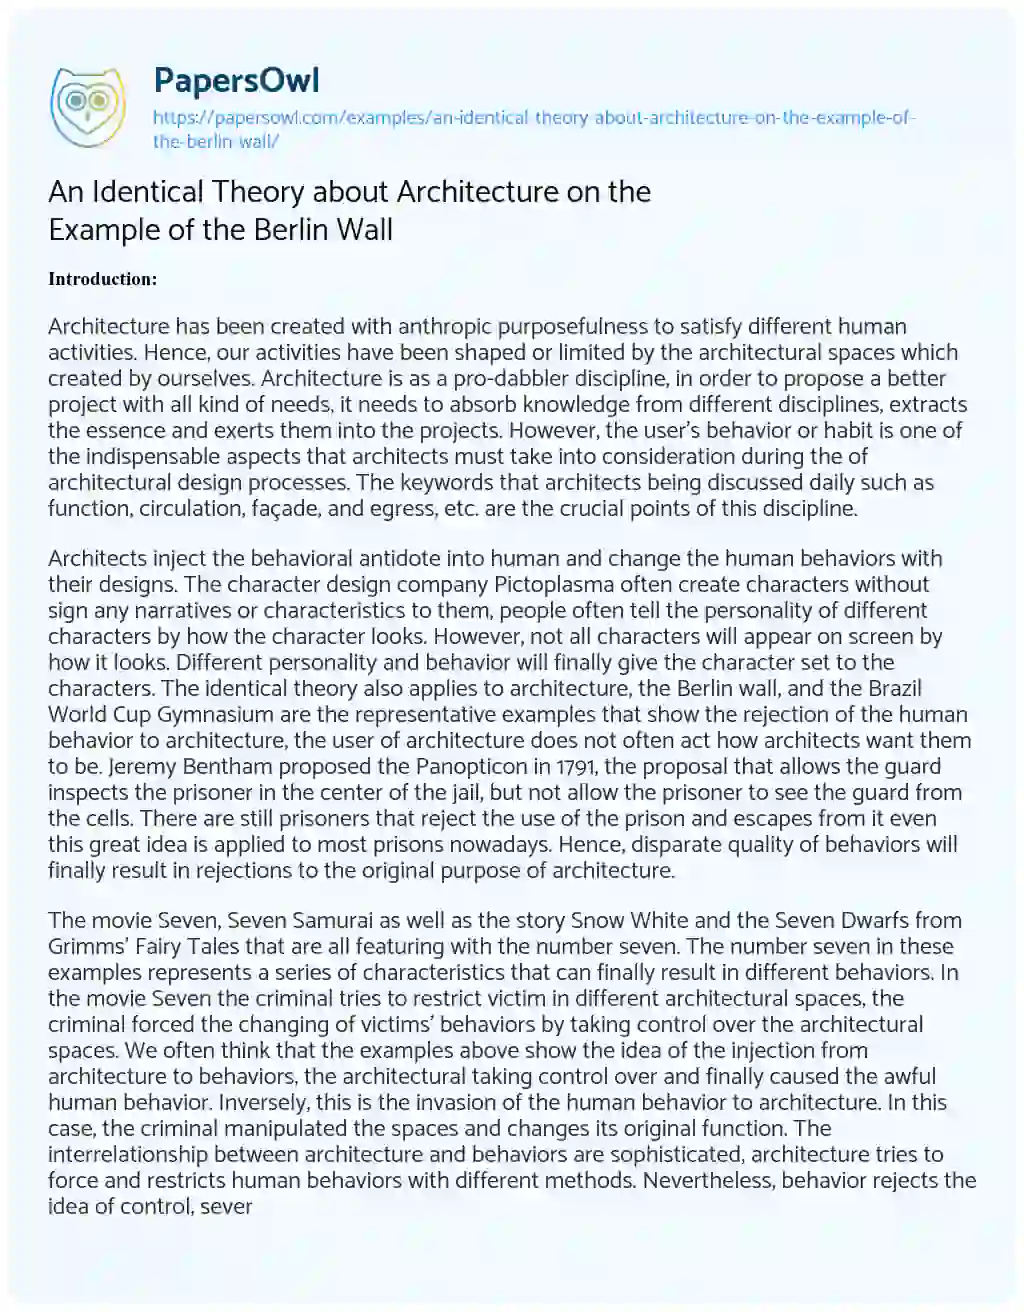 Essay on An Identical Theory about Architecture on the Example of the Berlin Wall